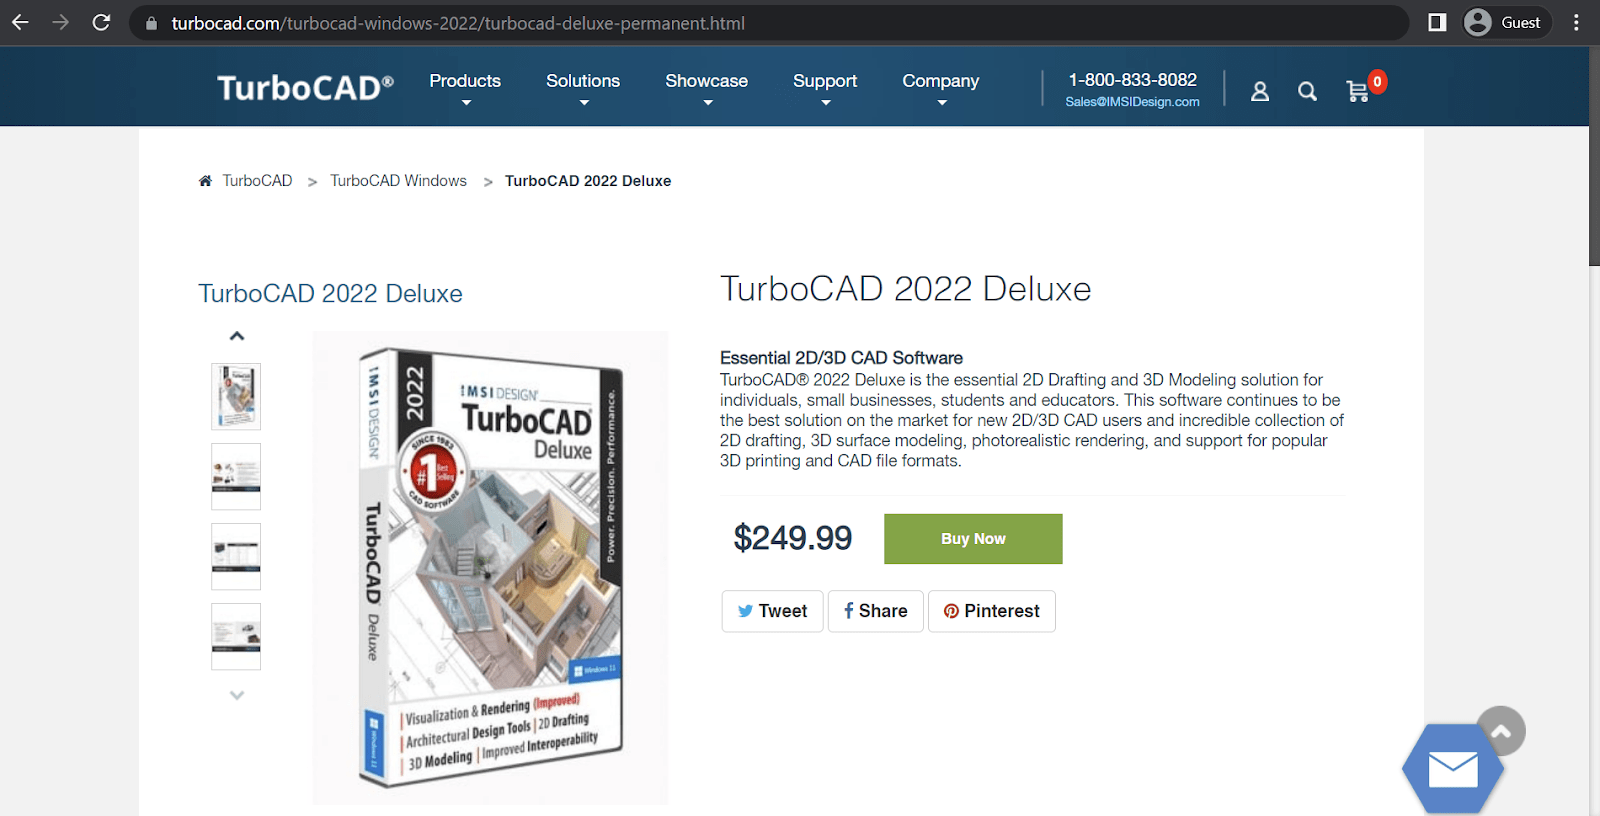 turbocad deluxe landing page